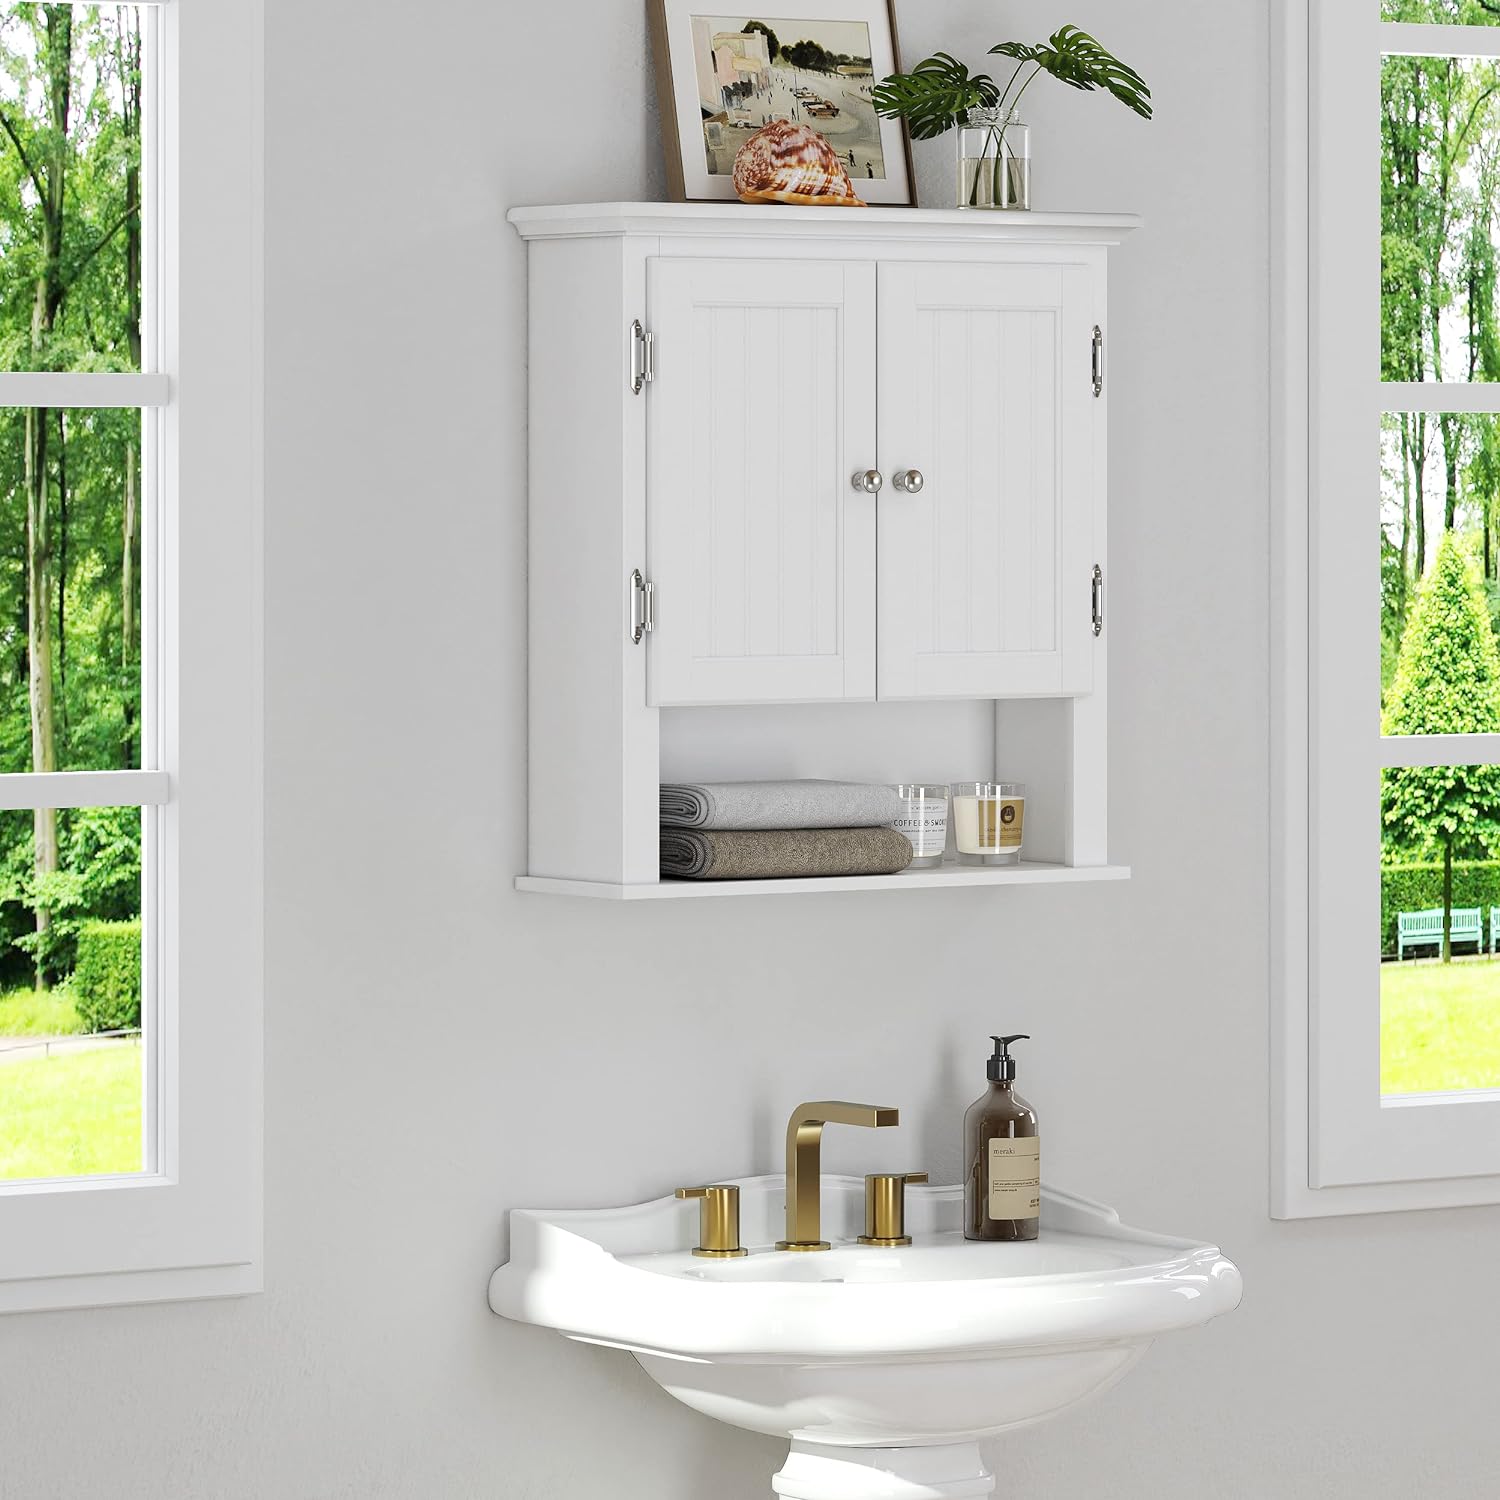 Utex Bathroom Cabinet Wall Mounted, Wood Hanging Cabinet, Wall Cabinets with Doors and Shelves Over The Toilet for Bathroom,White